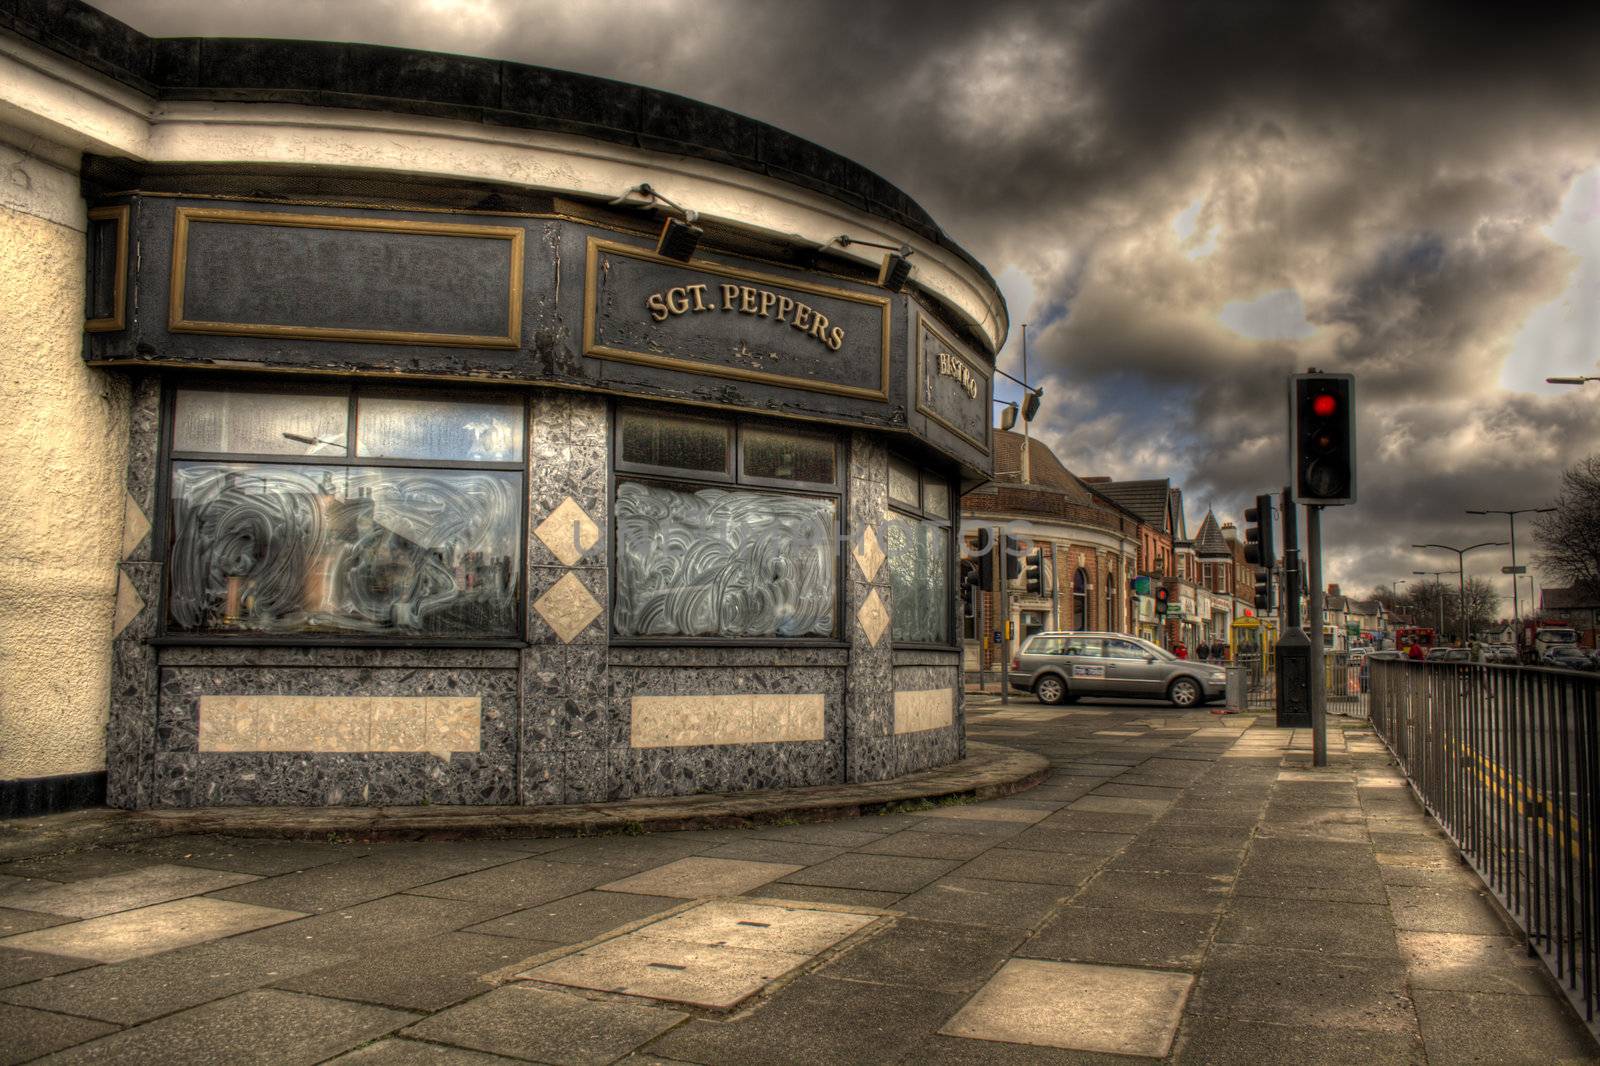 HDR image of Penny Lane "shelter in the middle of a roundabout" made famous by The Beatles song